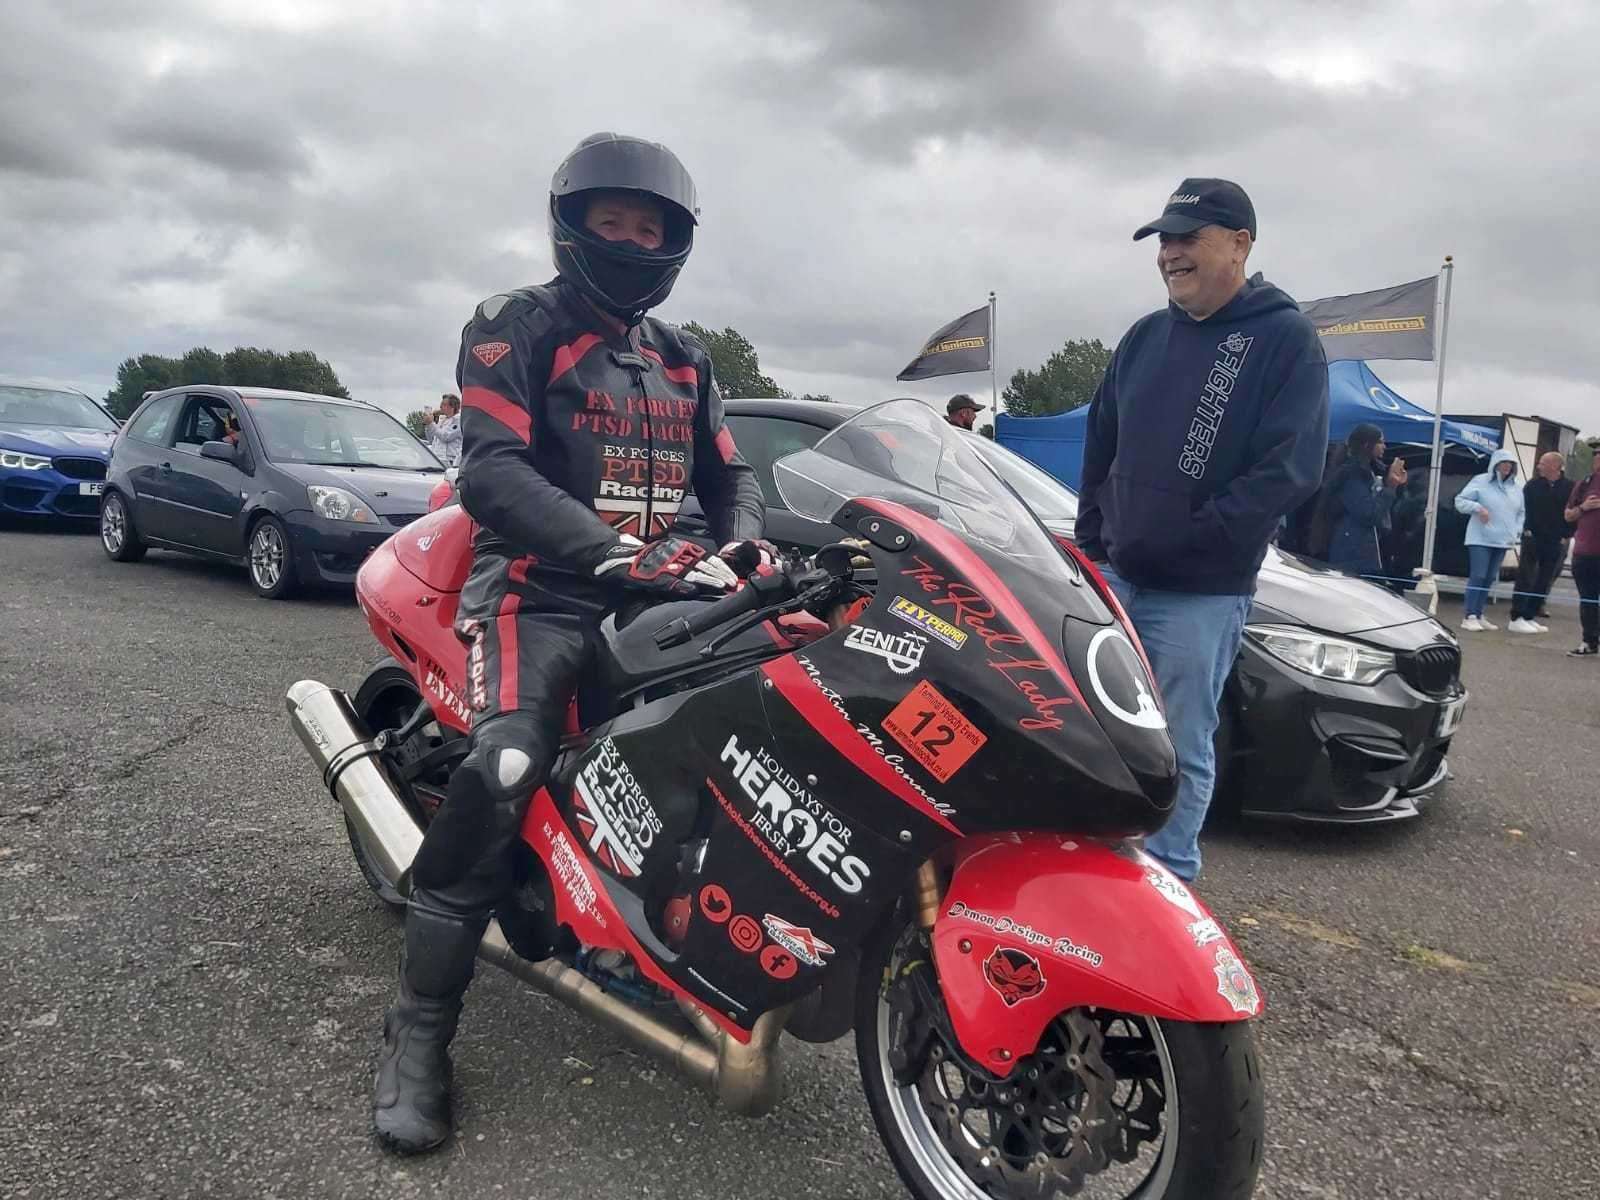 Martin McConnell, from Tunbridge Wells, died at a car and motorcycle event. Picture: Kryssie Chittenden